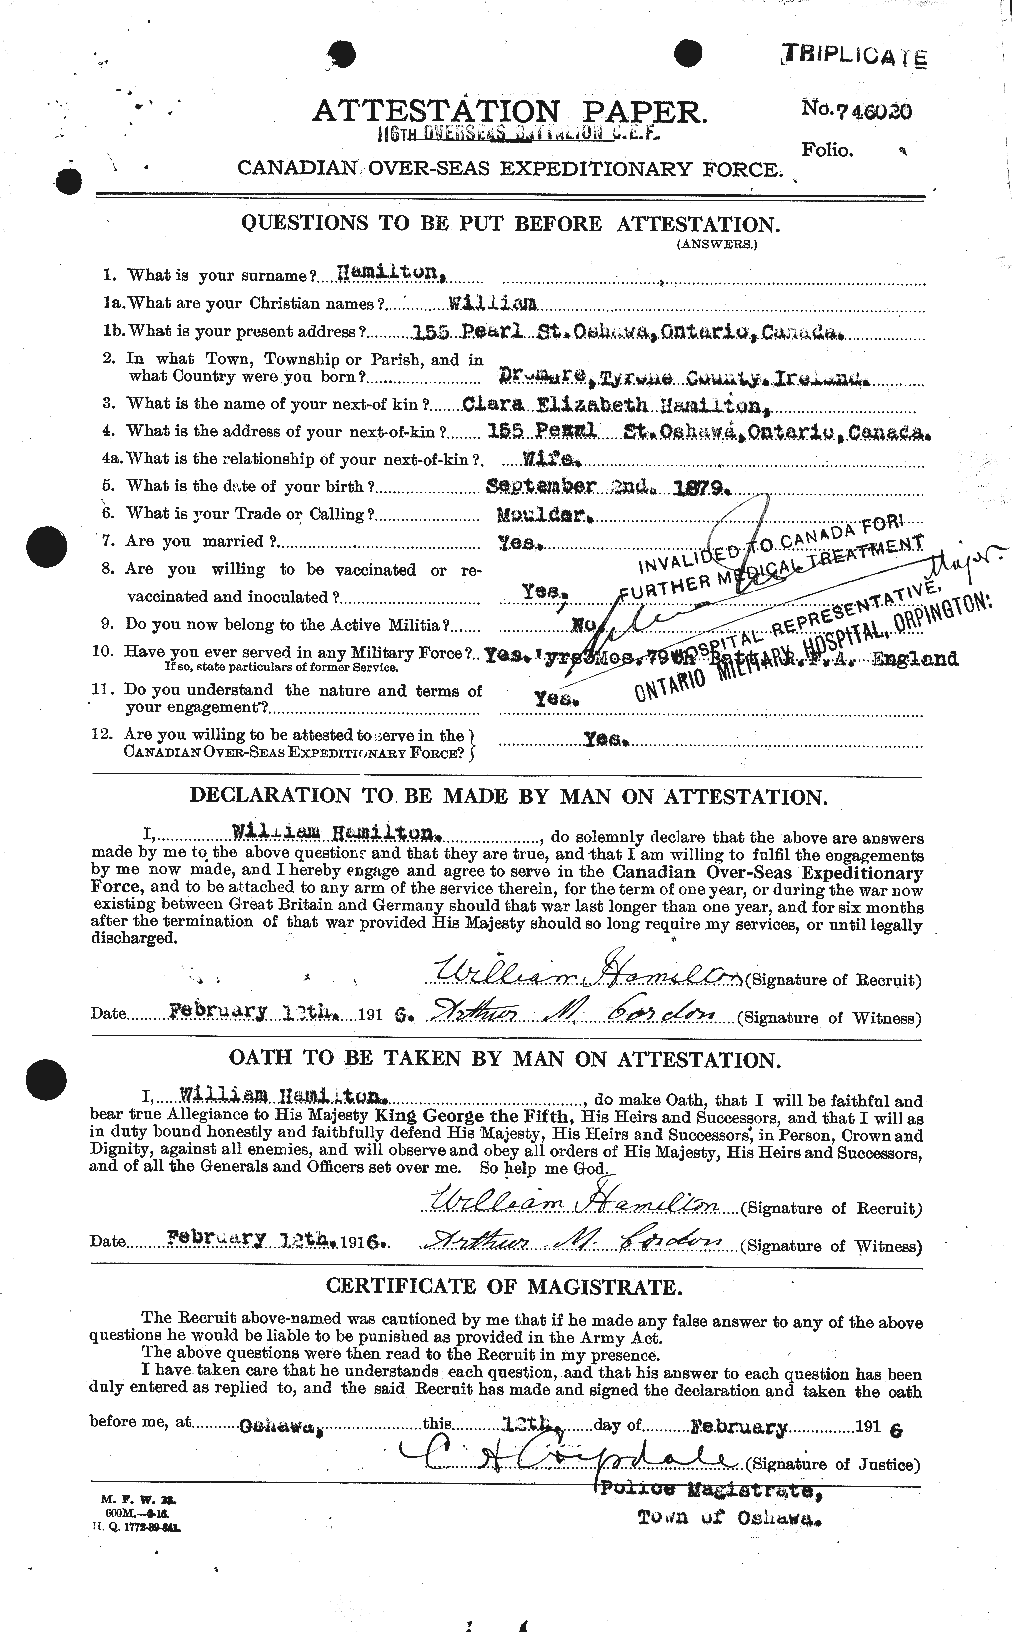 Personnel Records of the First World War - CEF 374868a